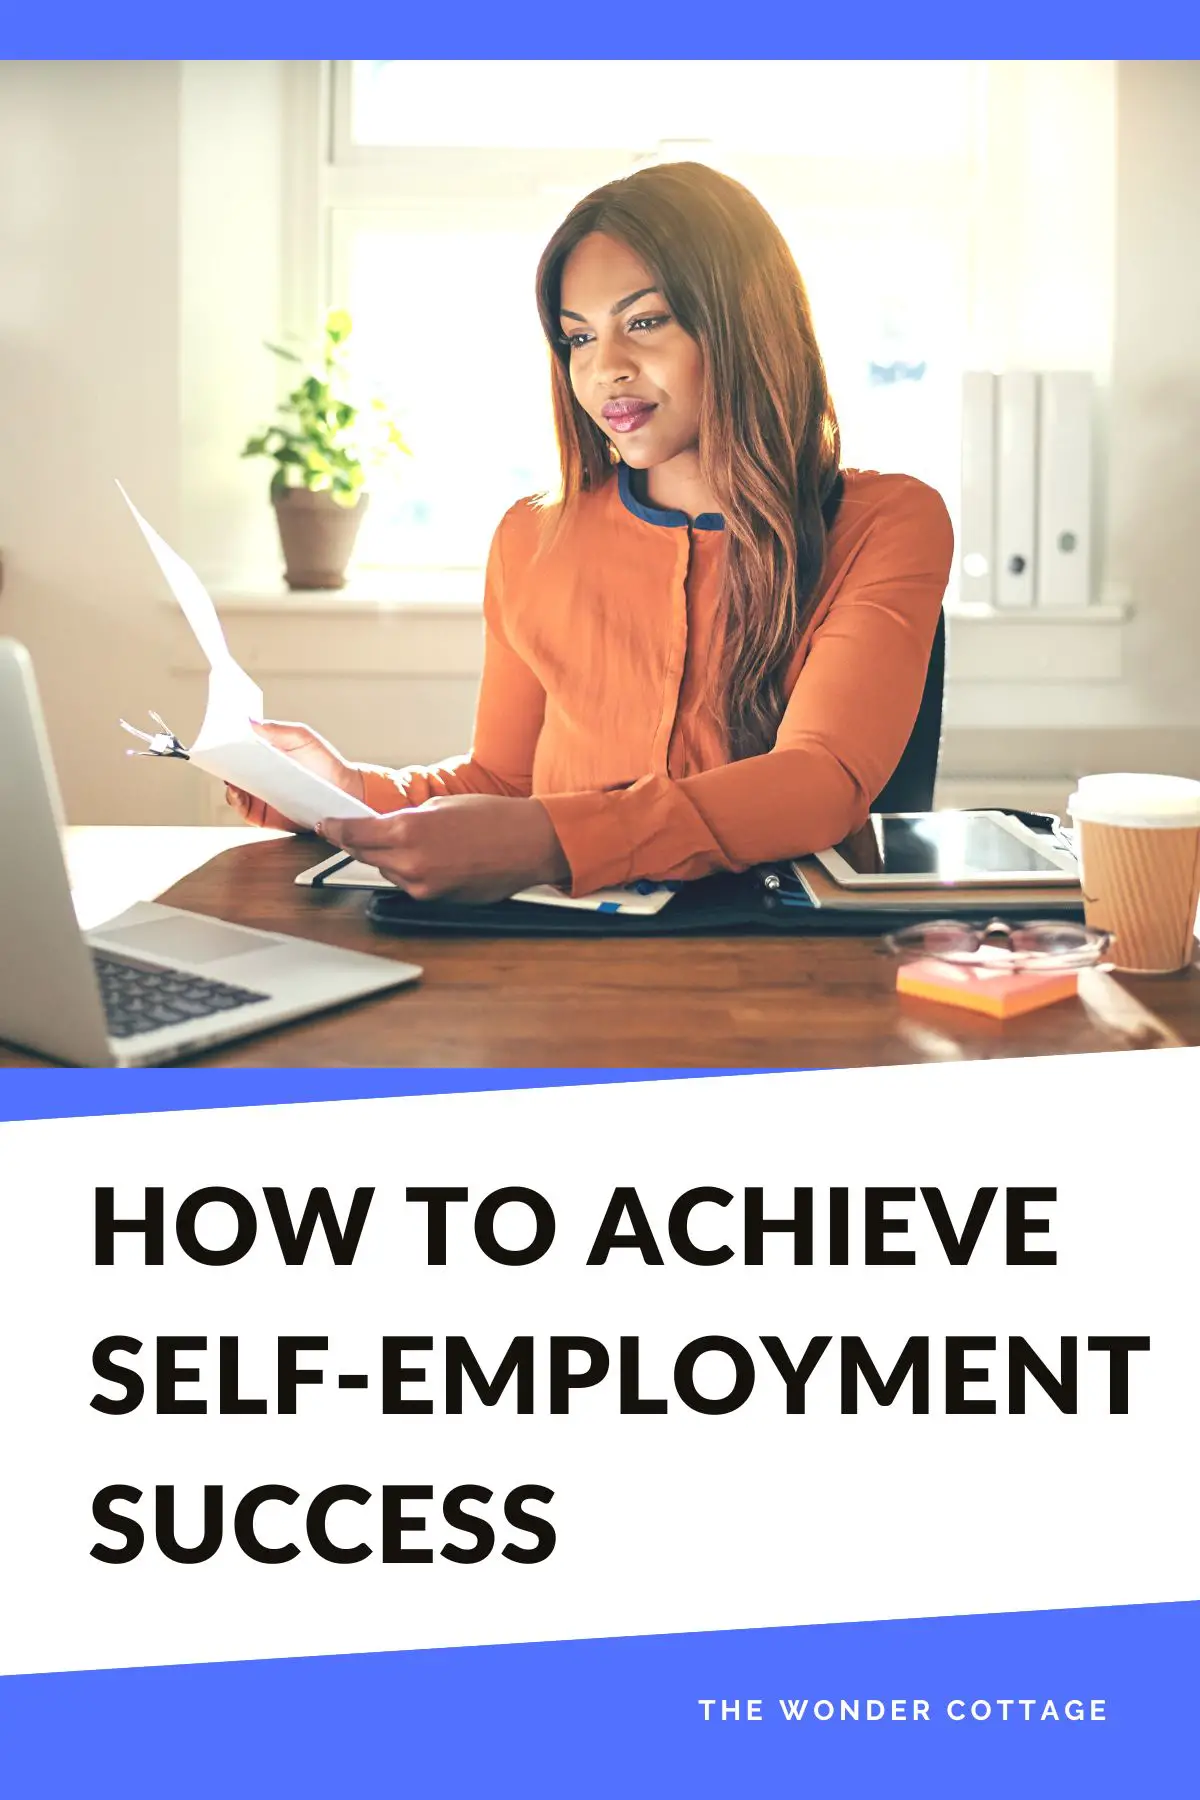 How To Achieve Self-Employment Success